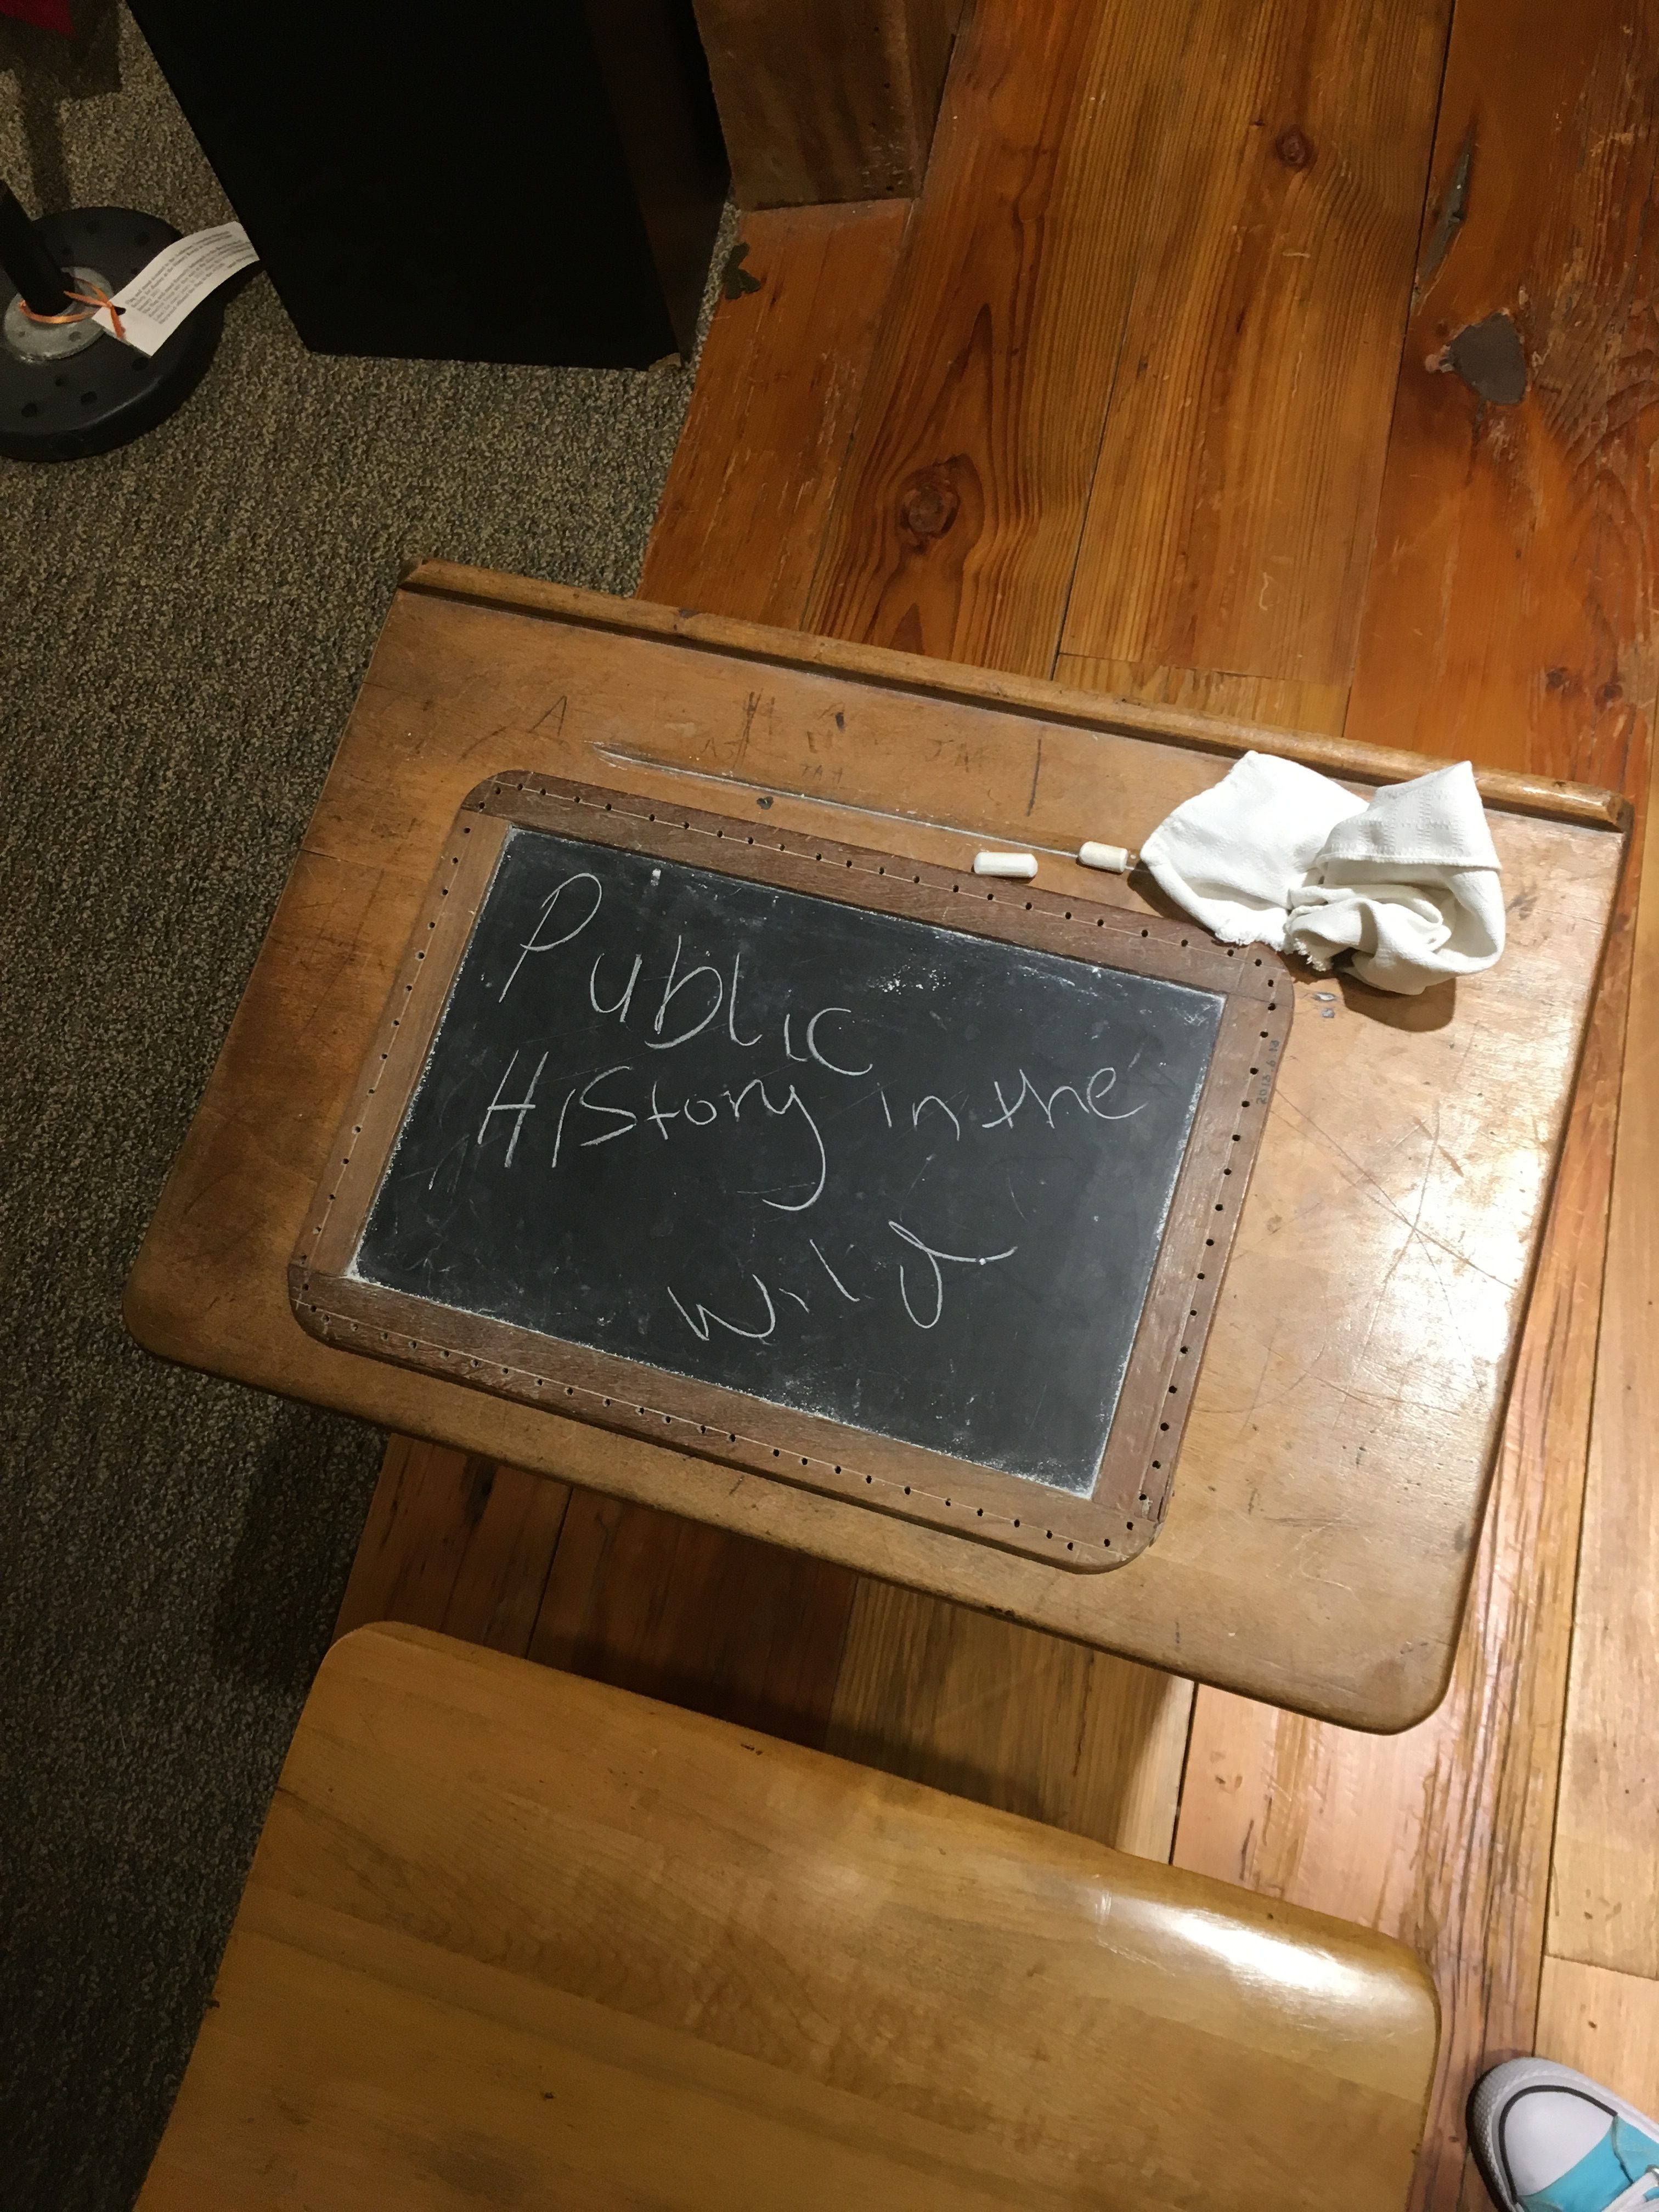 A school desk from a closed school with a chalkboard